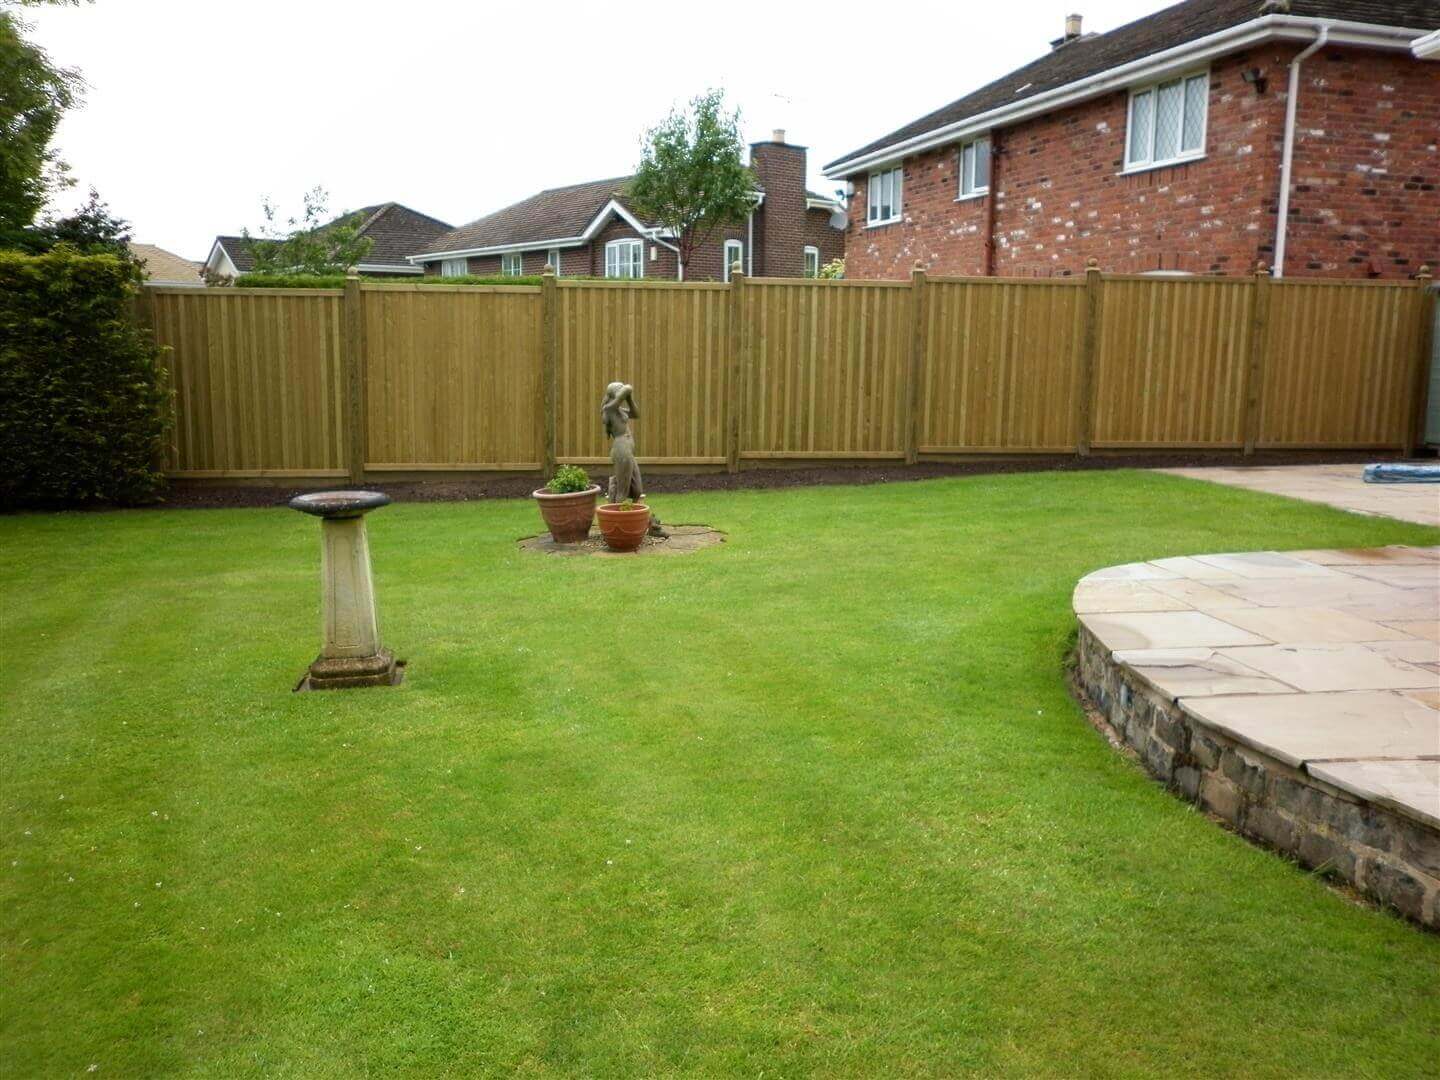 New Fence panels installed in garden compliment lawn